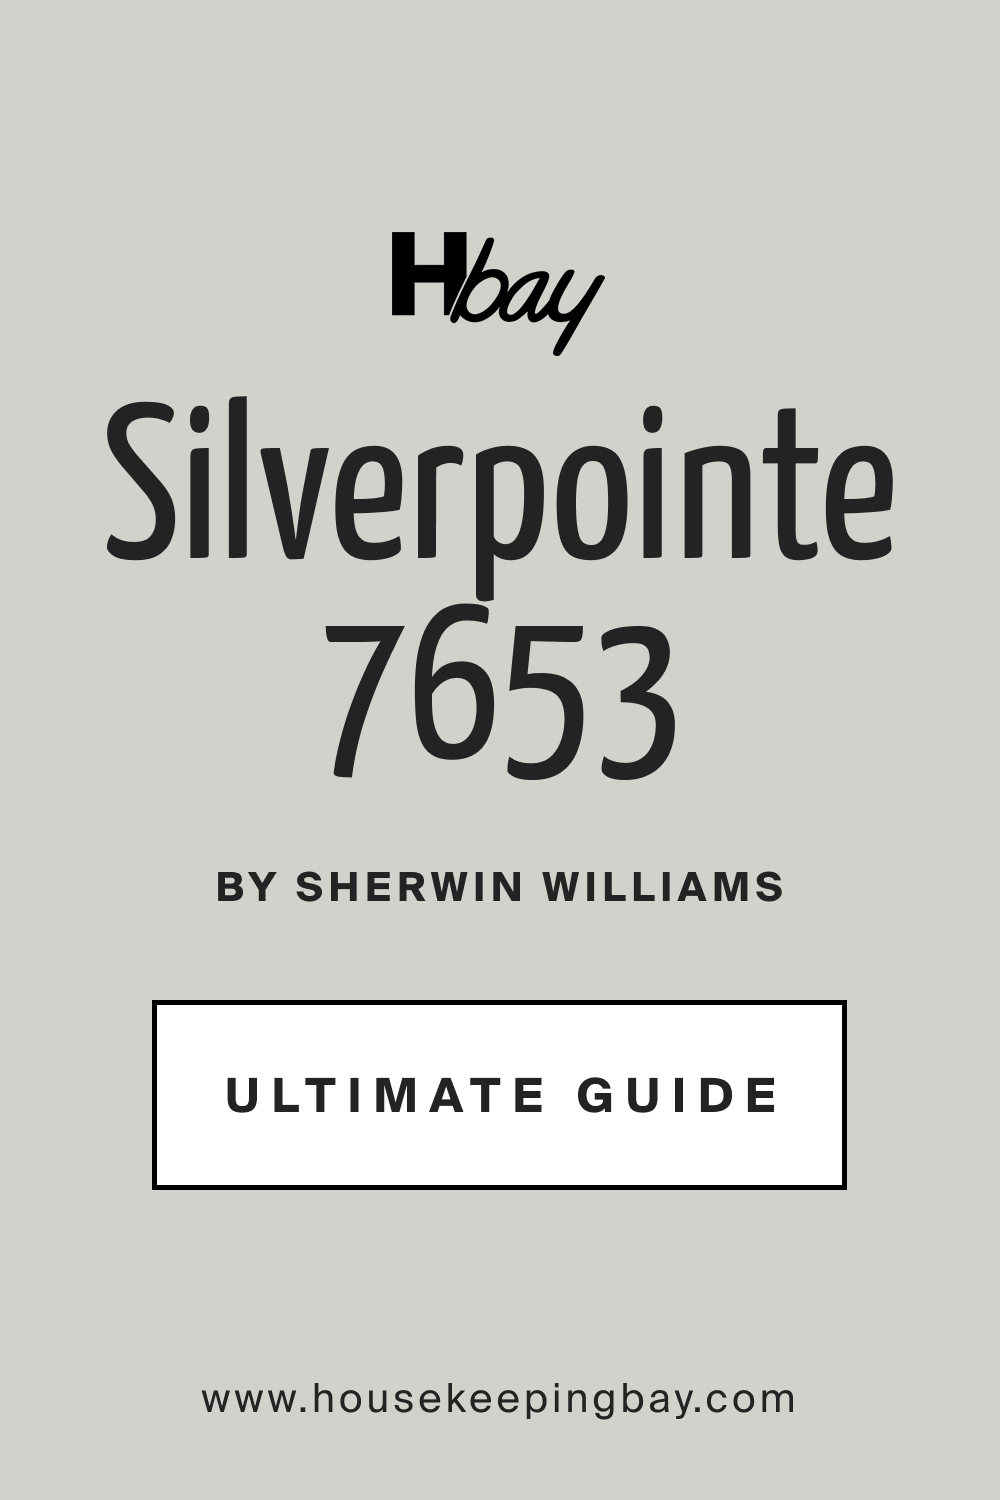 Silverpointe SW 7653 by Sherwin Williams Ultimate Guide